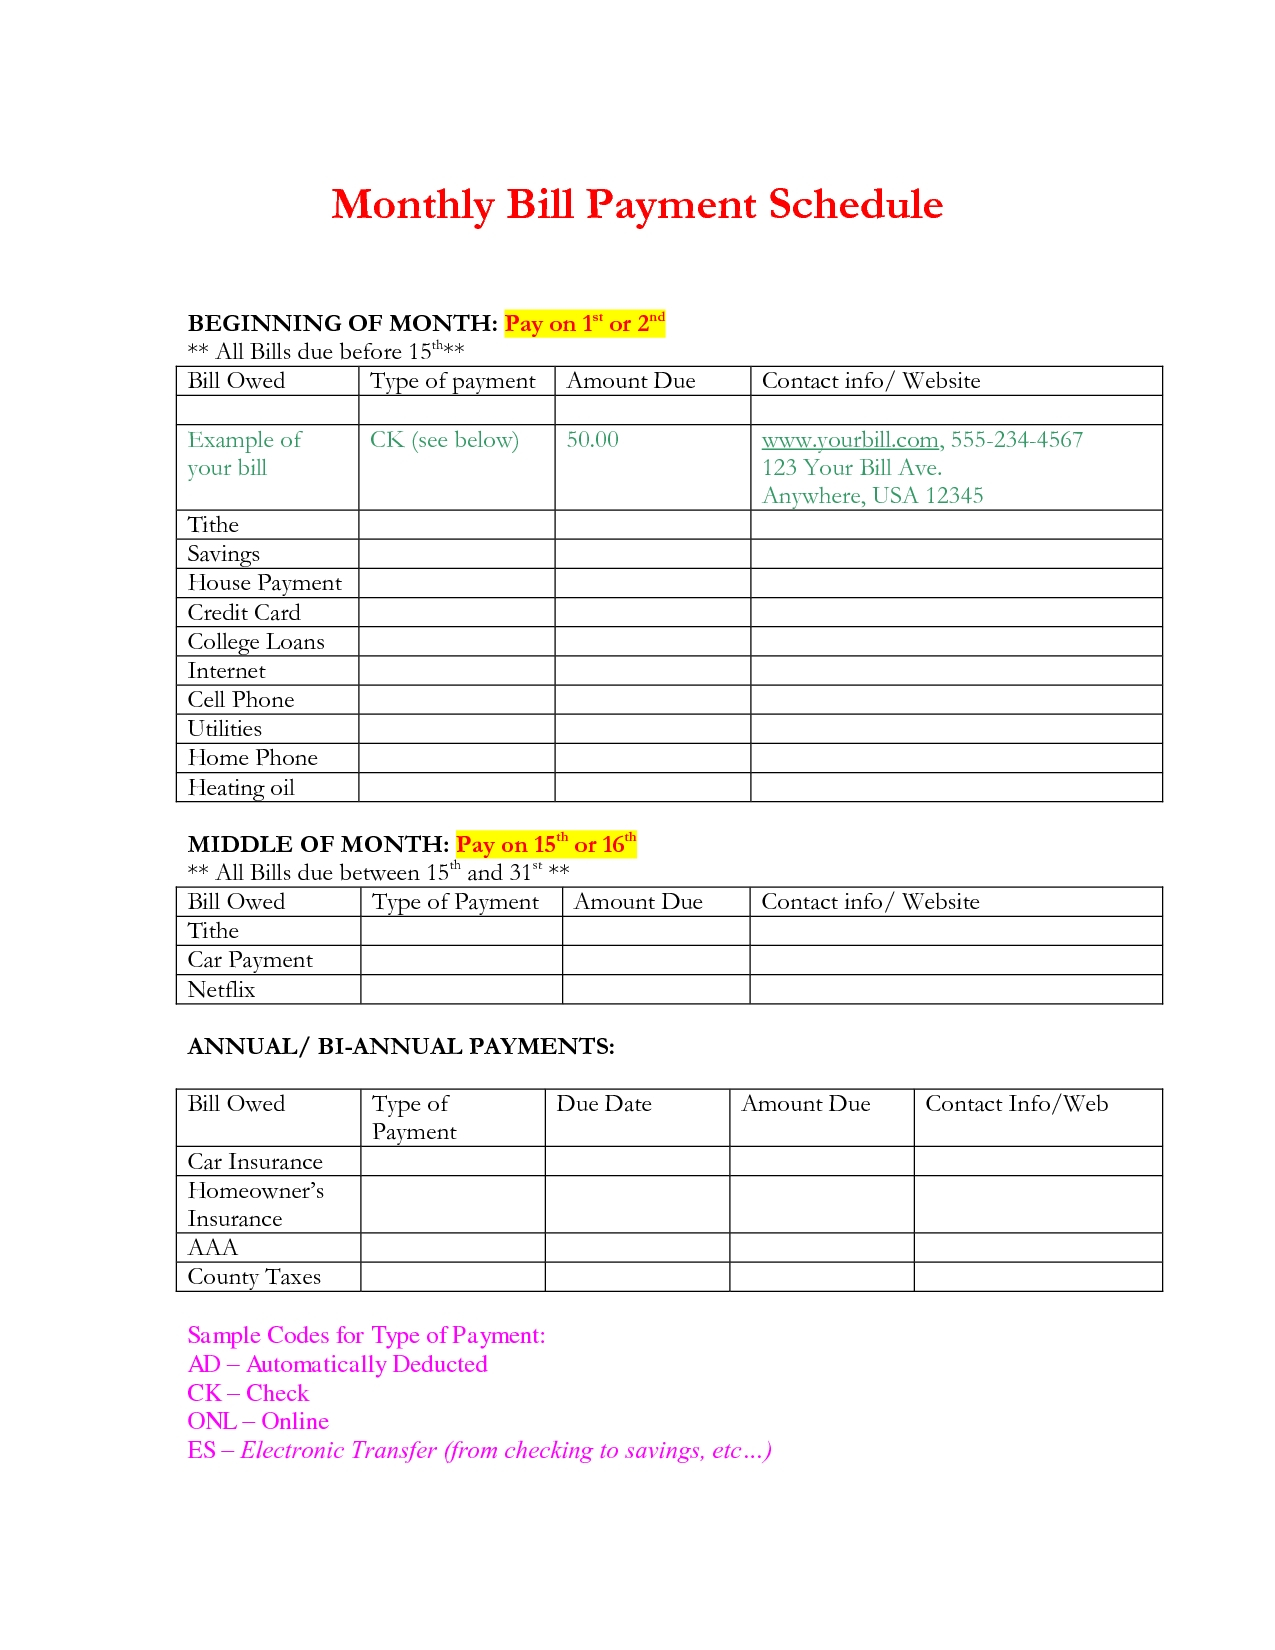 Blank Monthly Bill Payments Worksheet | Free Calendar within Bill Payment Calendar Printable